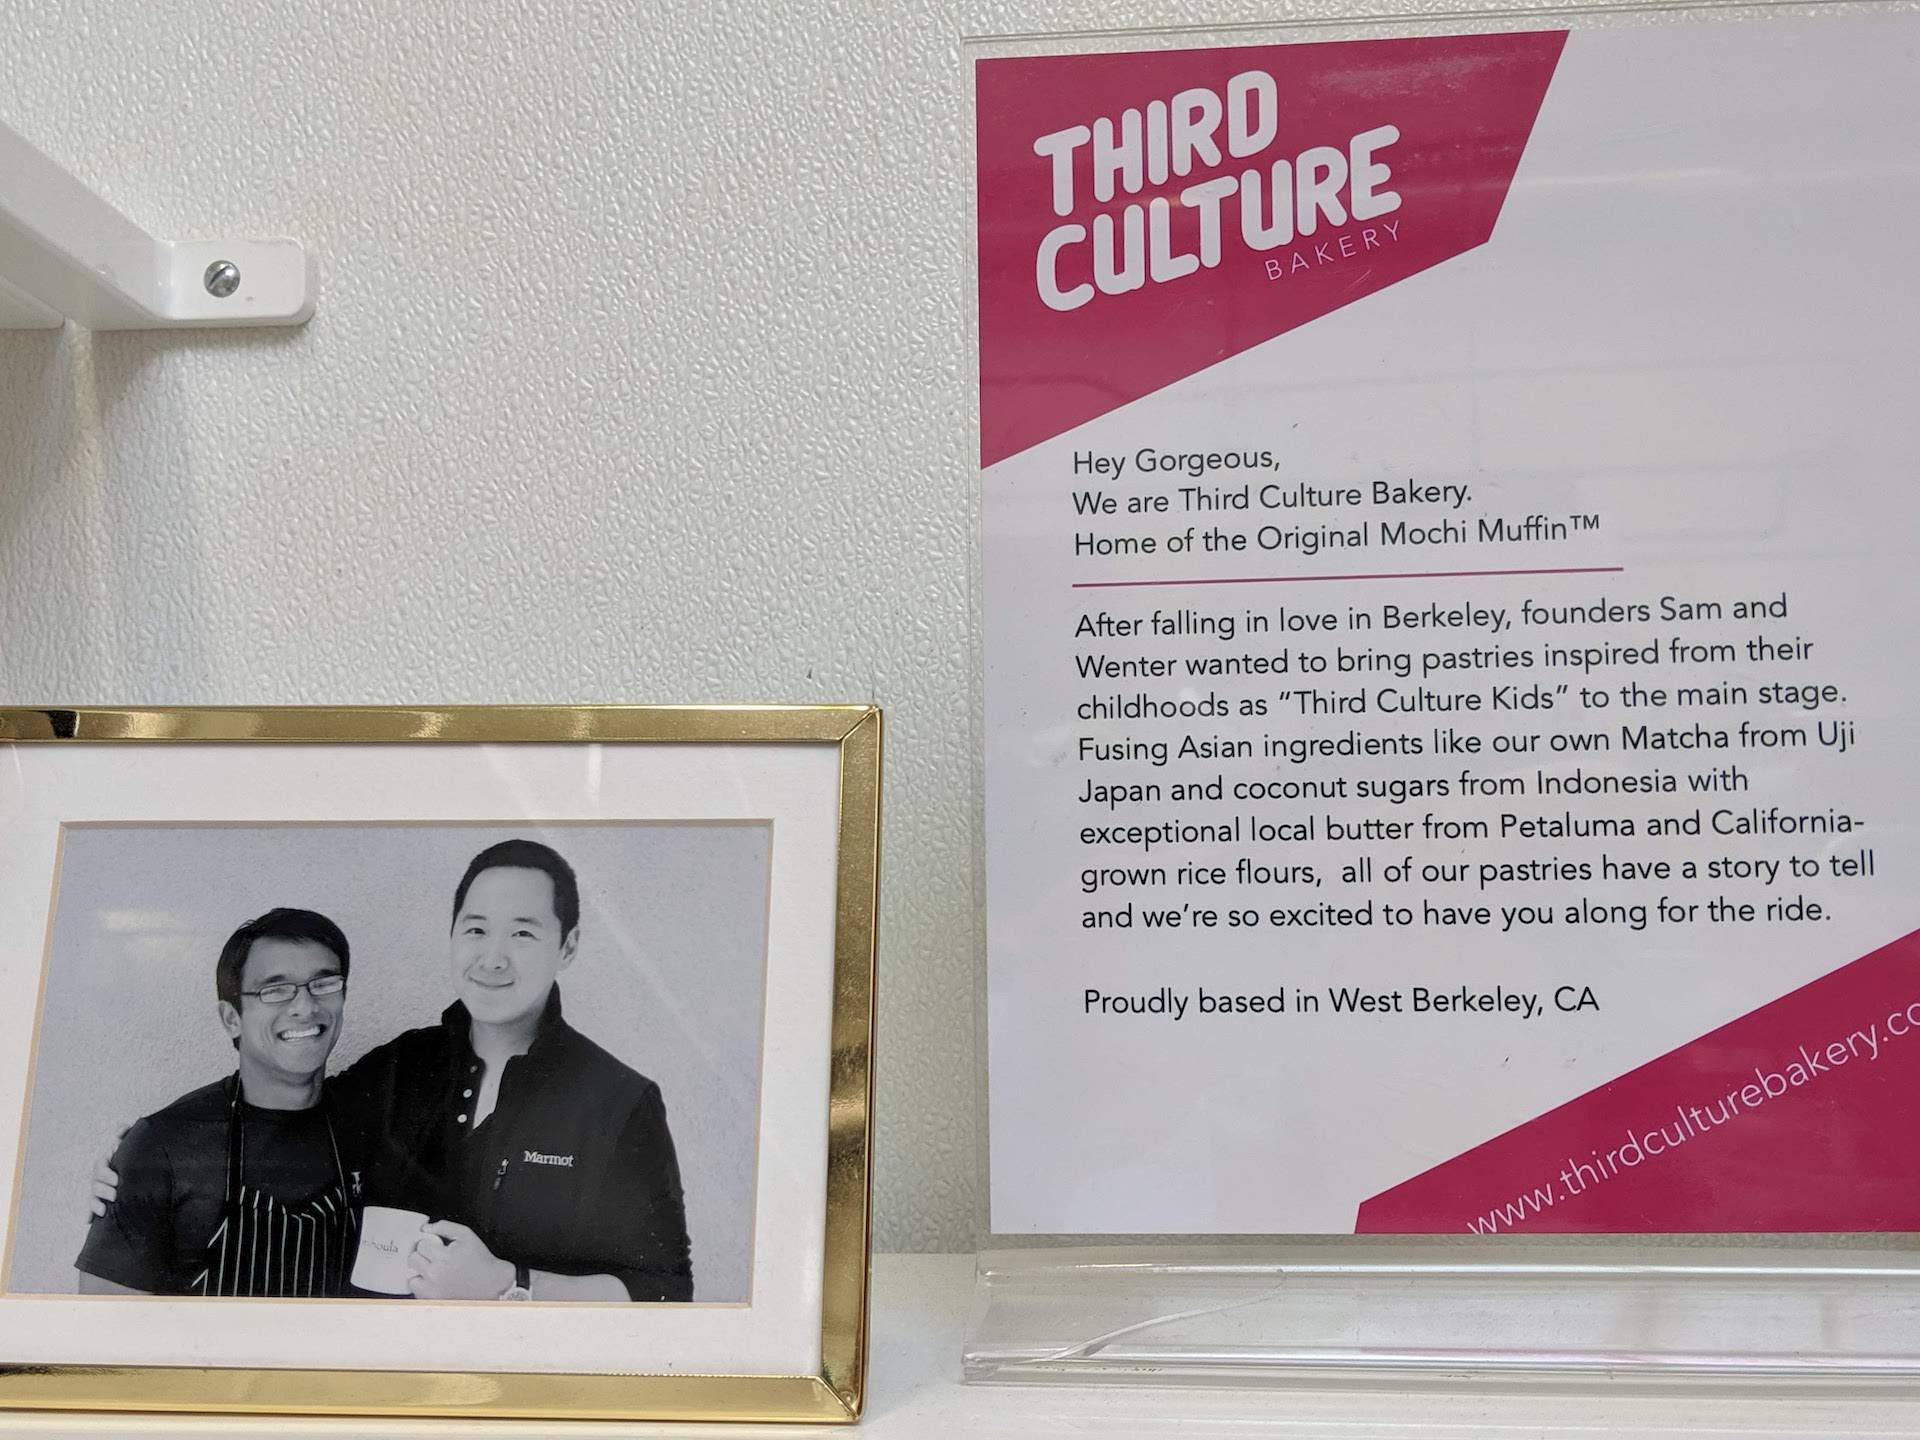 Third Culture Bakery owners, Sam Butarbutar and Wenter Shyu